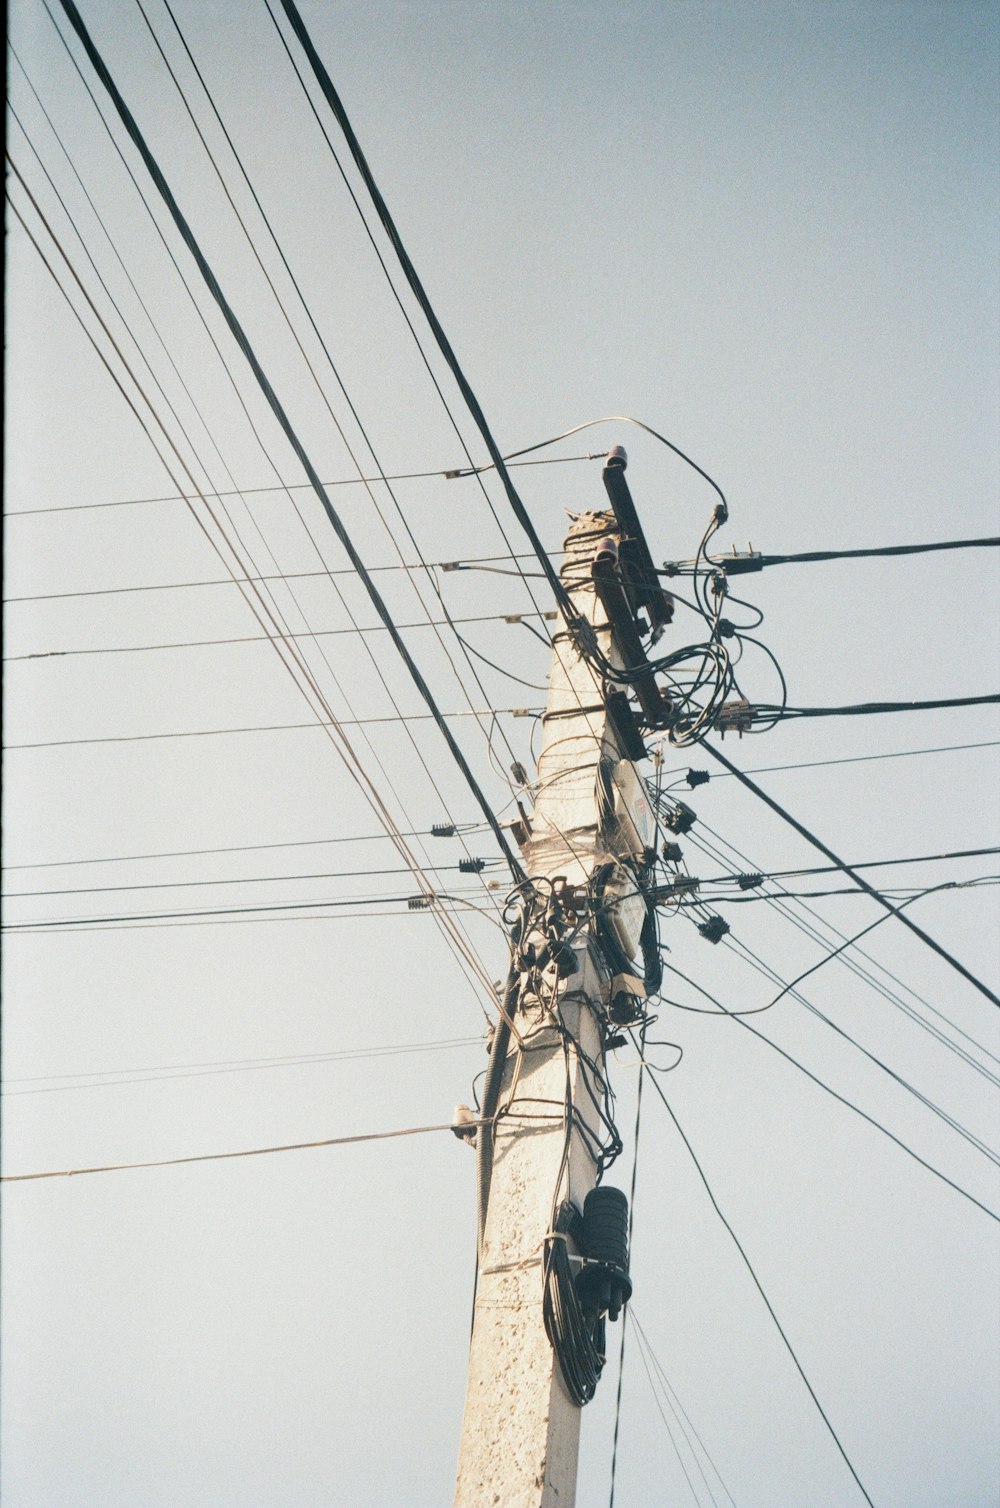 a telephone pole with a bunch of wires attached to it